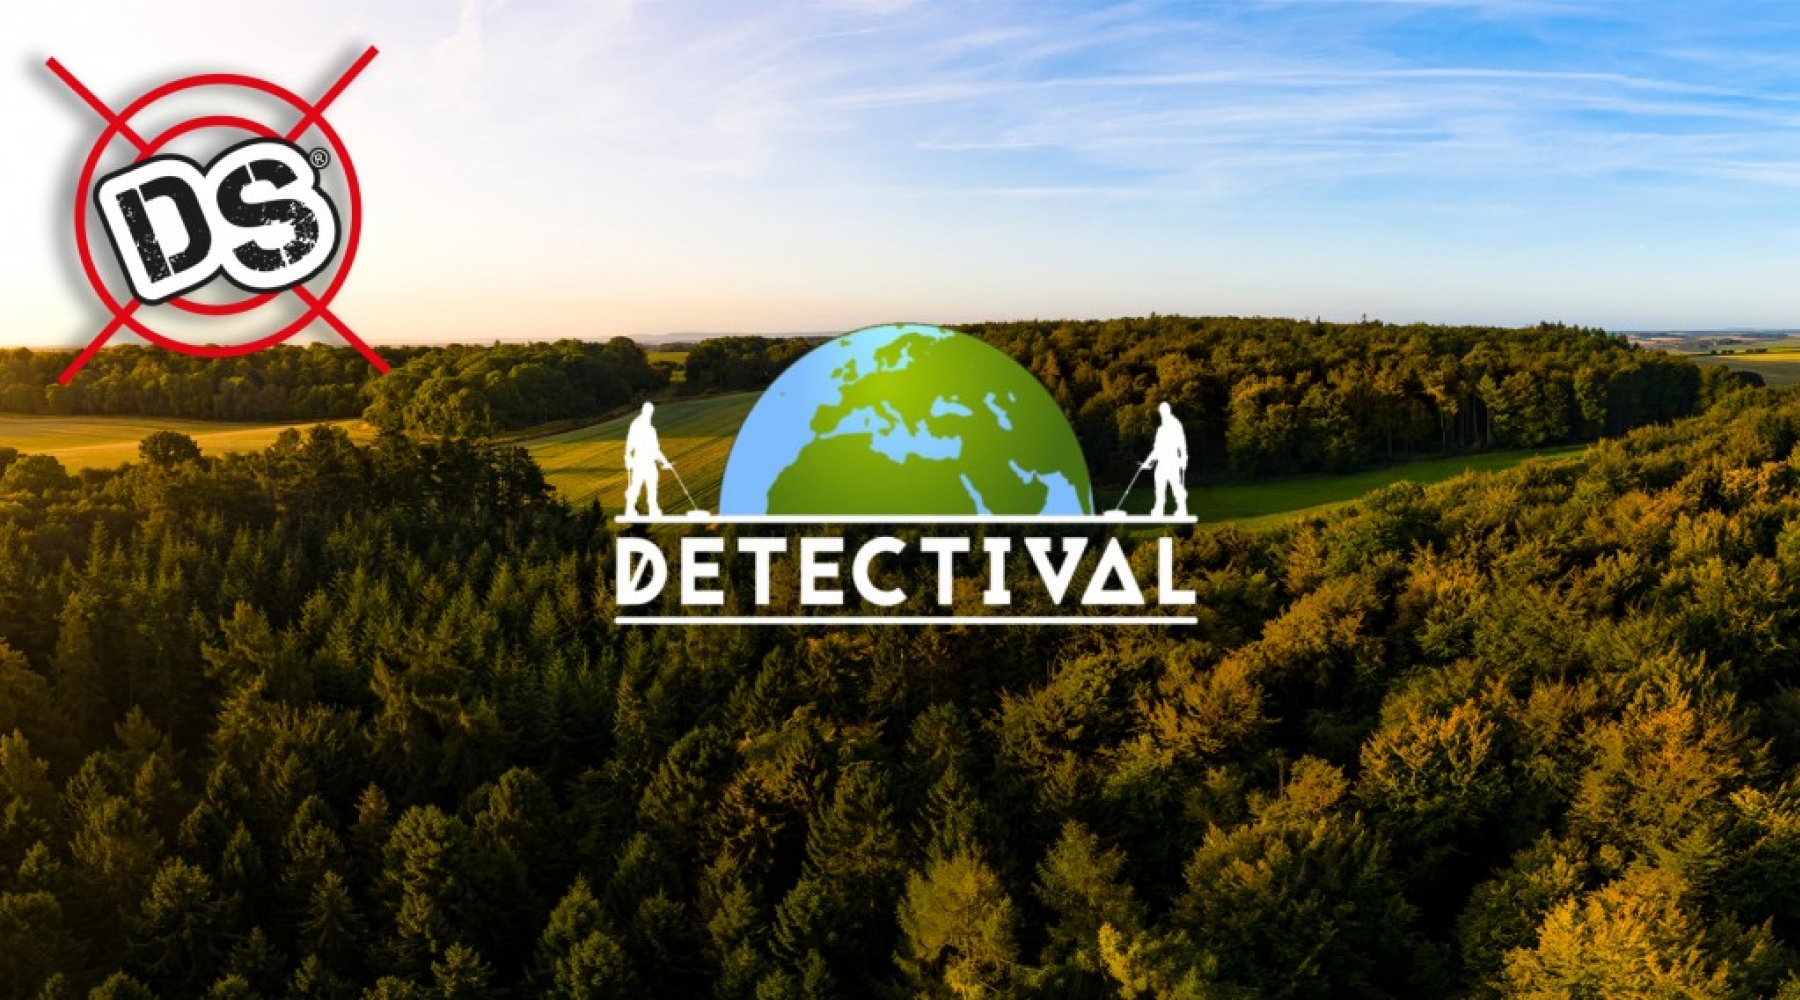 Welcome to "Detectival," the famous metal detecting event in the UK